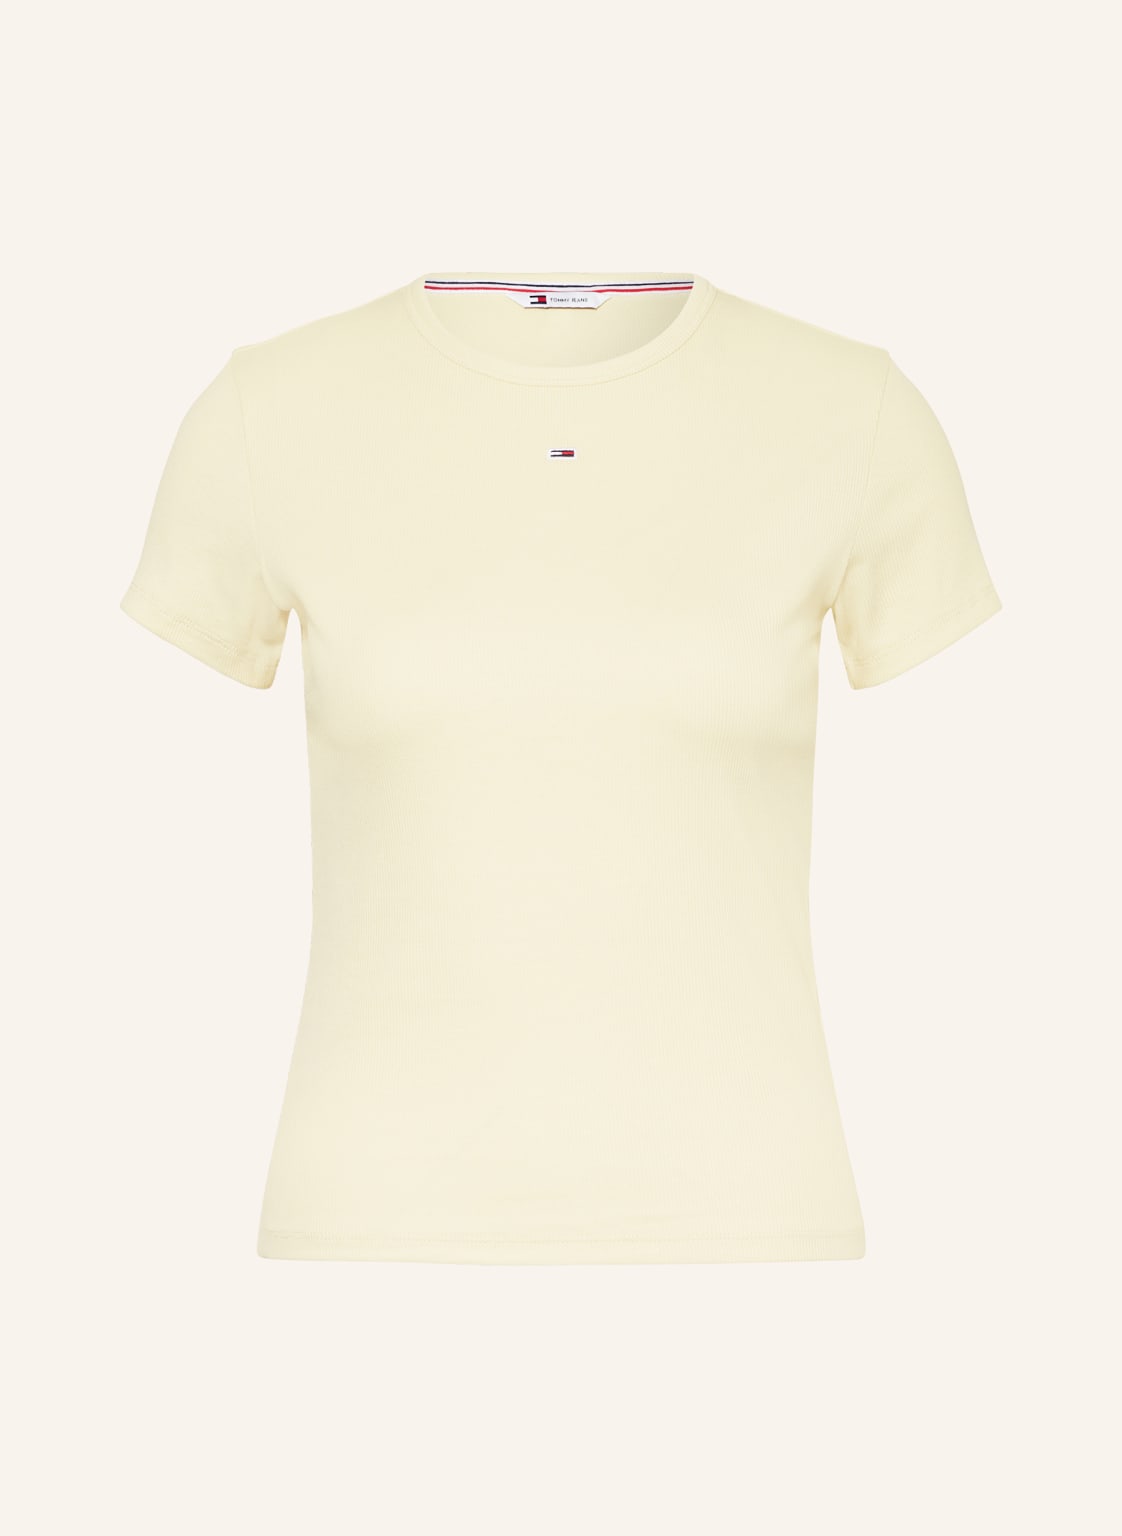 Tommy Jeans T-Shirt gelb von Tommy Jeans